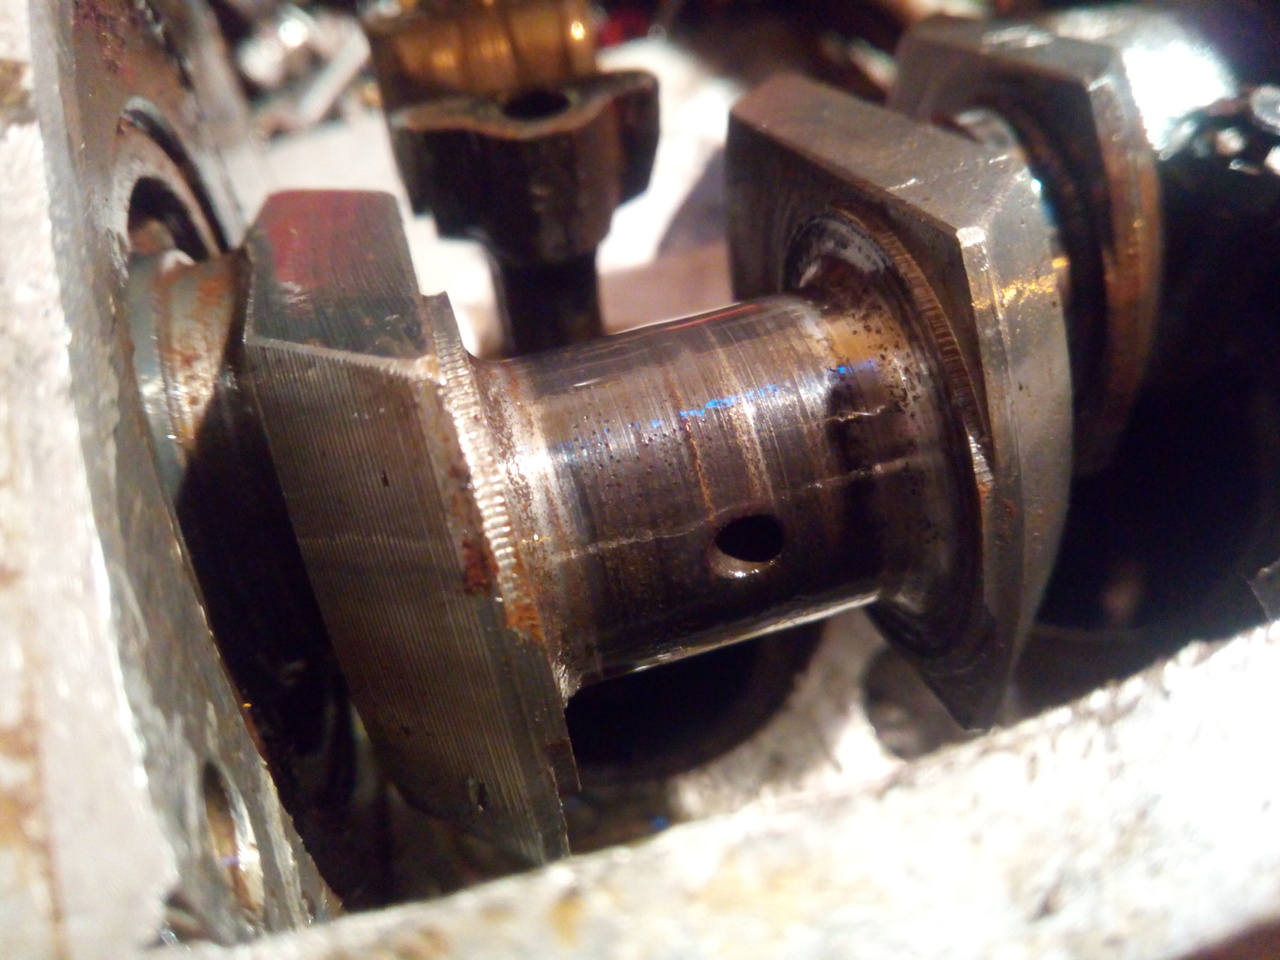 The surface of the crankshaft from the compressor. It's darkened
and looks to have scoring marks.